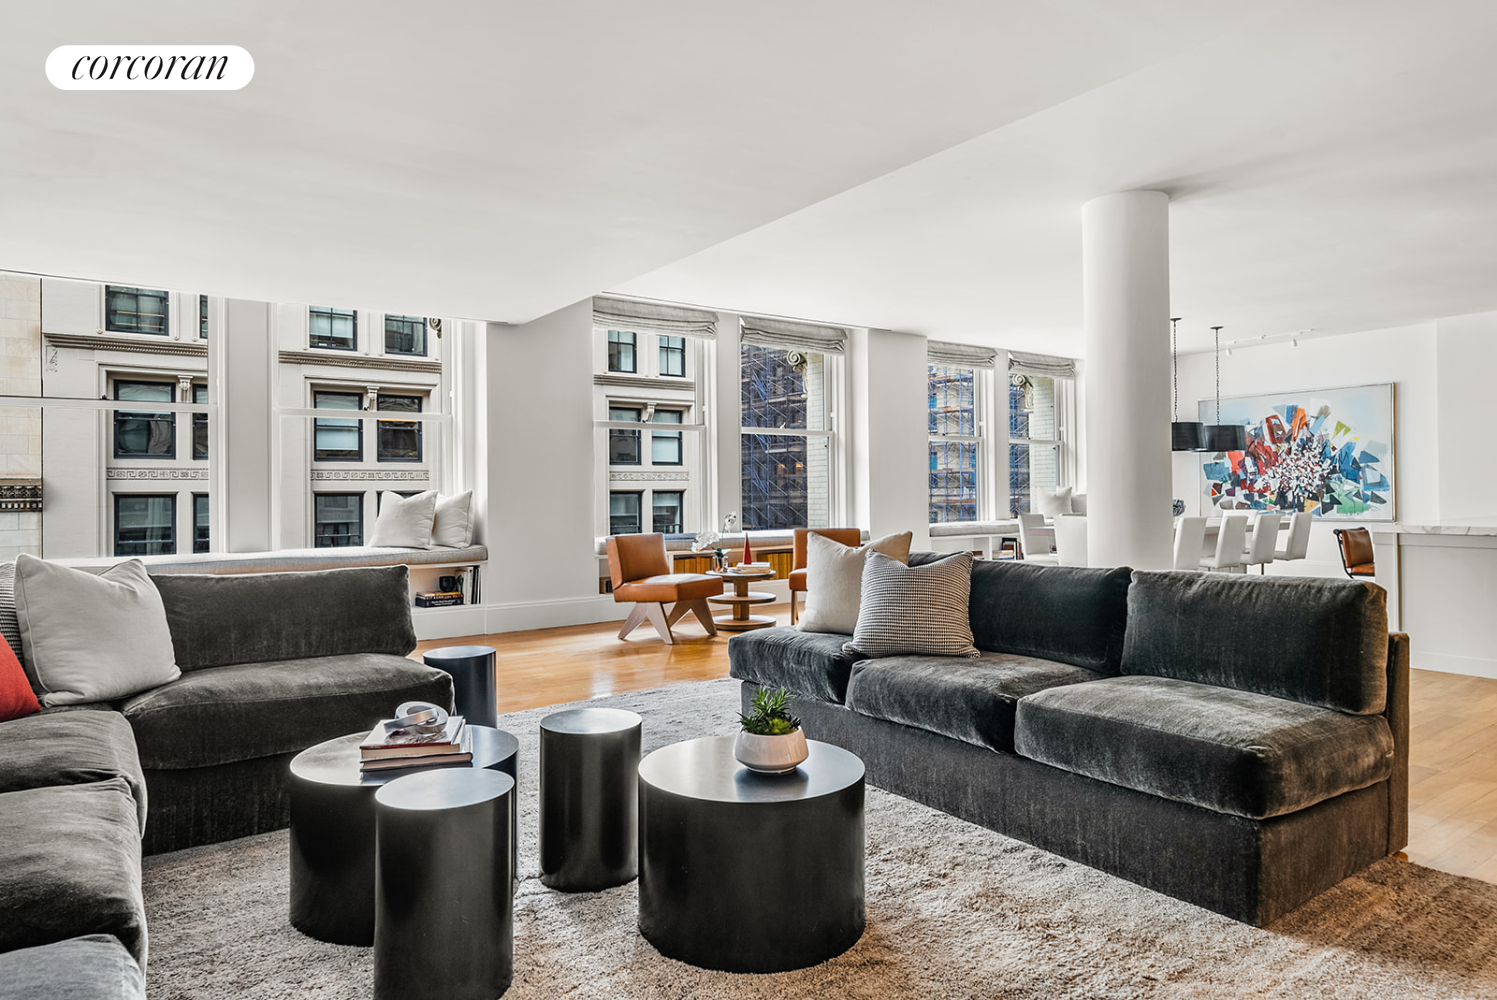 141 5th Avenue 4Ab, Flatiron, Downtown, NYC - 3 Bedrooms  
3.5 Bathrooms  
5 Rooms - 